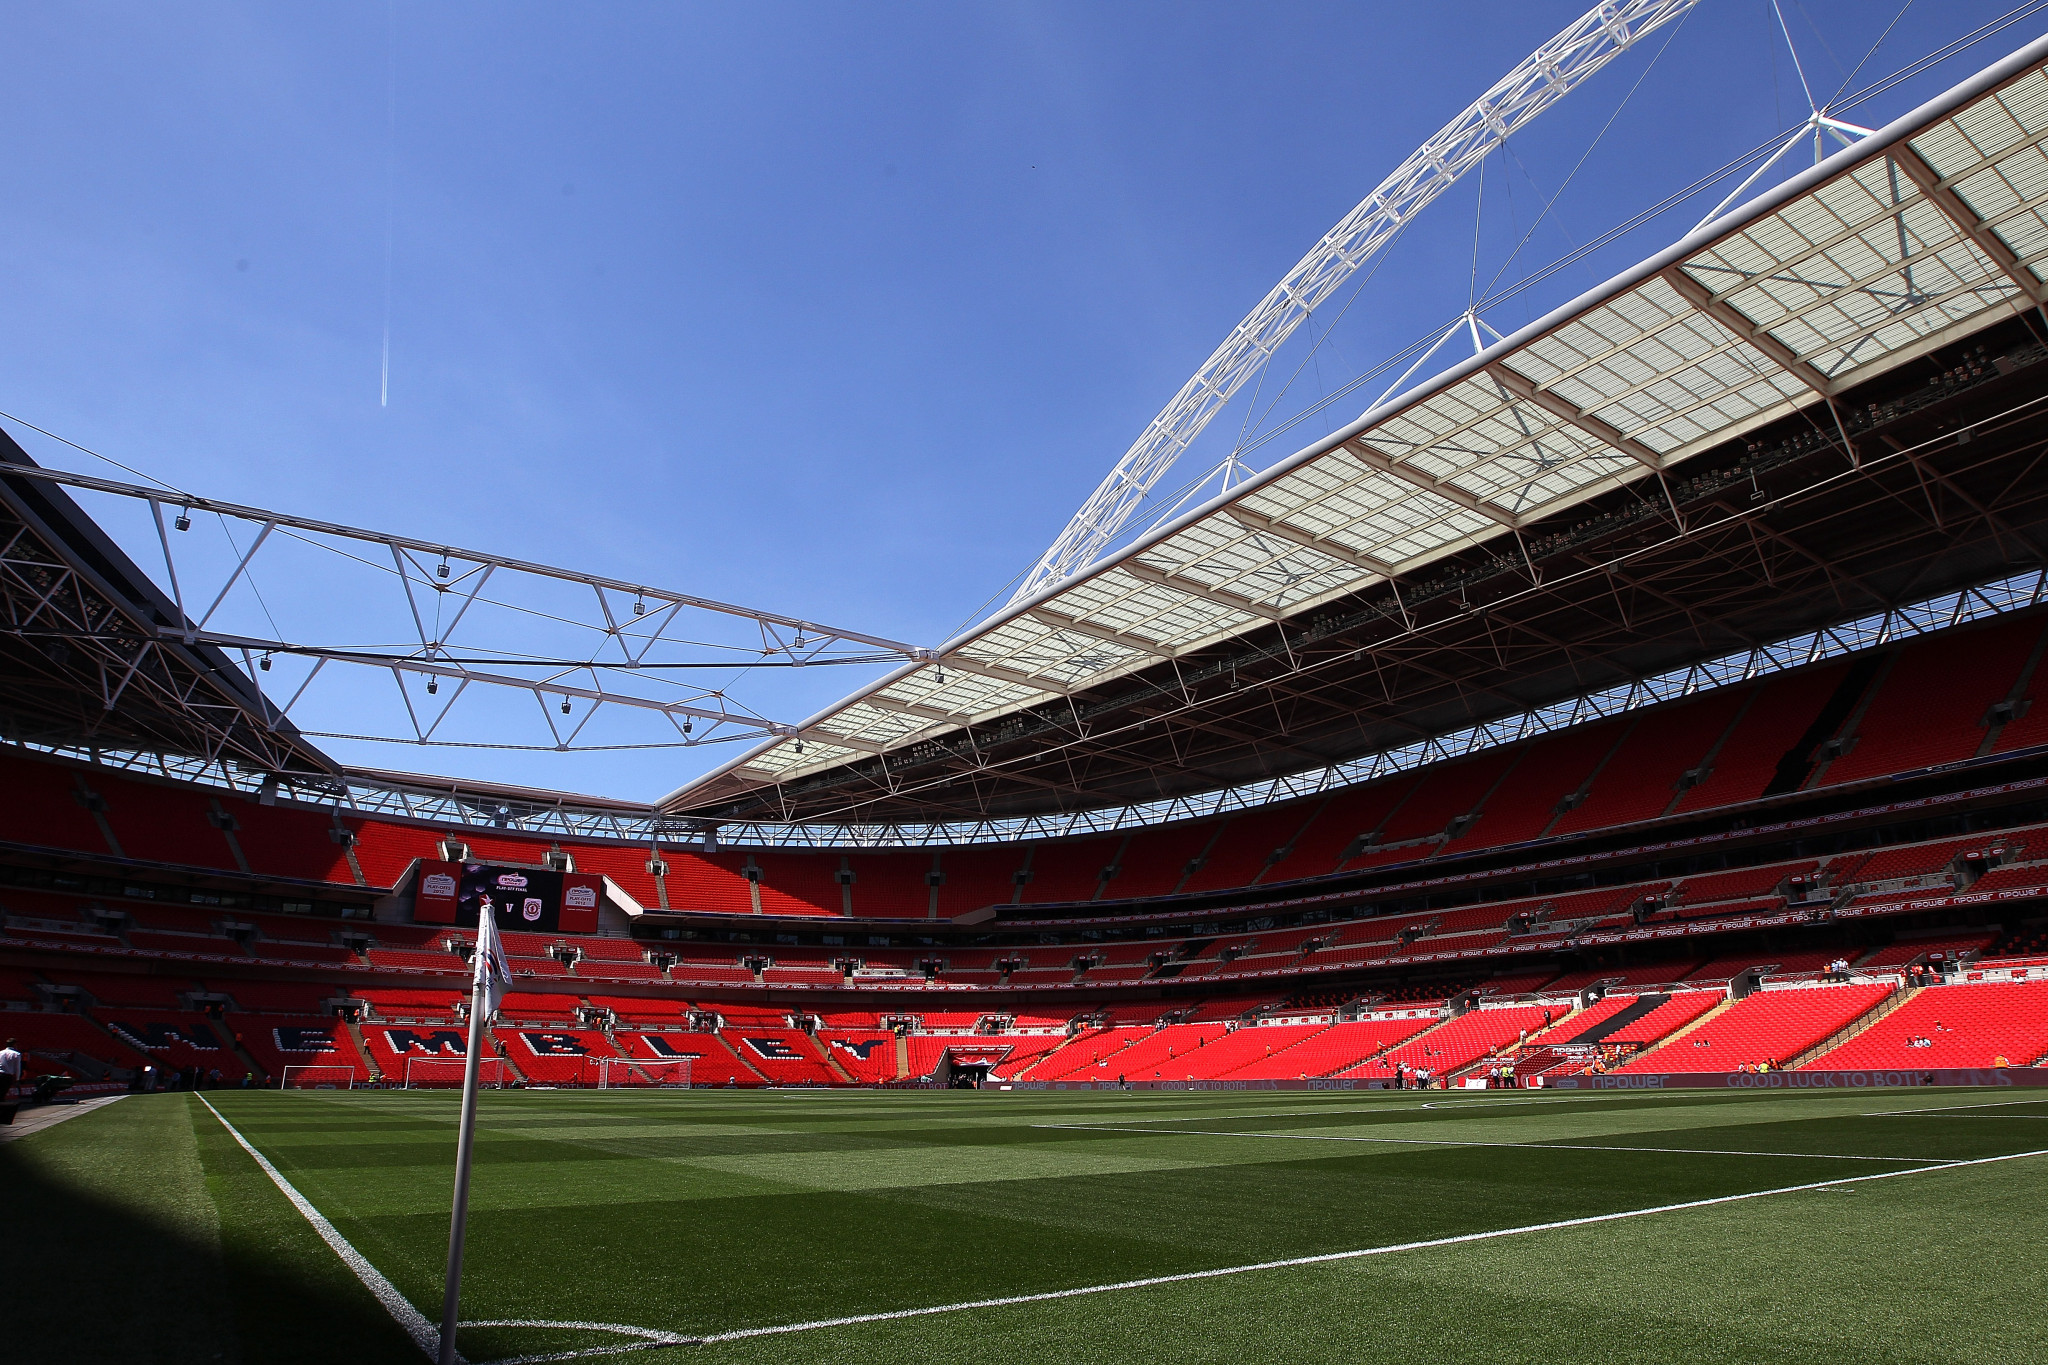 Wembley Stadium is set to host the semi-finals and final of Euro 2020 ©Getty Images